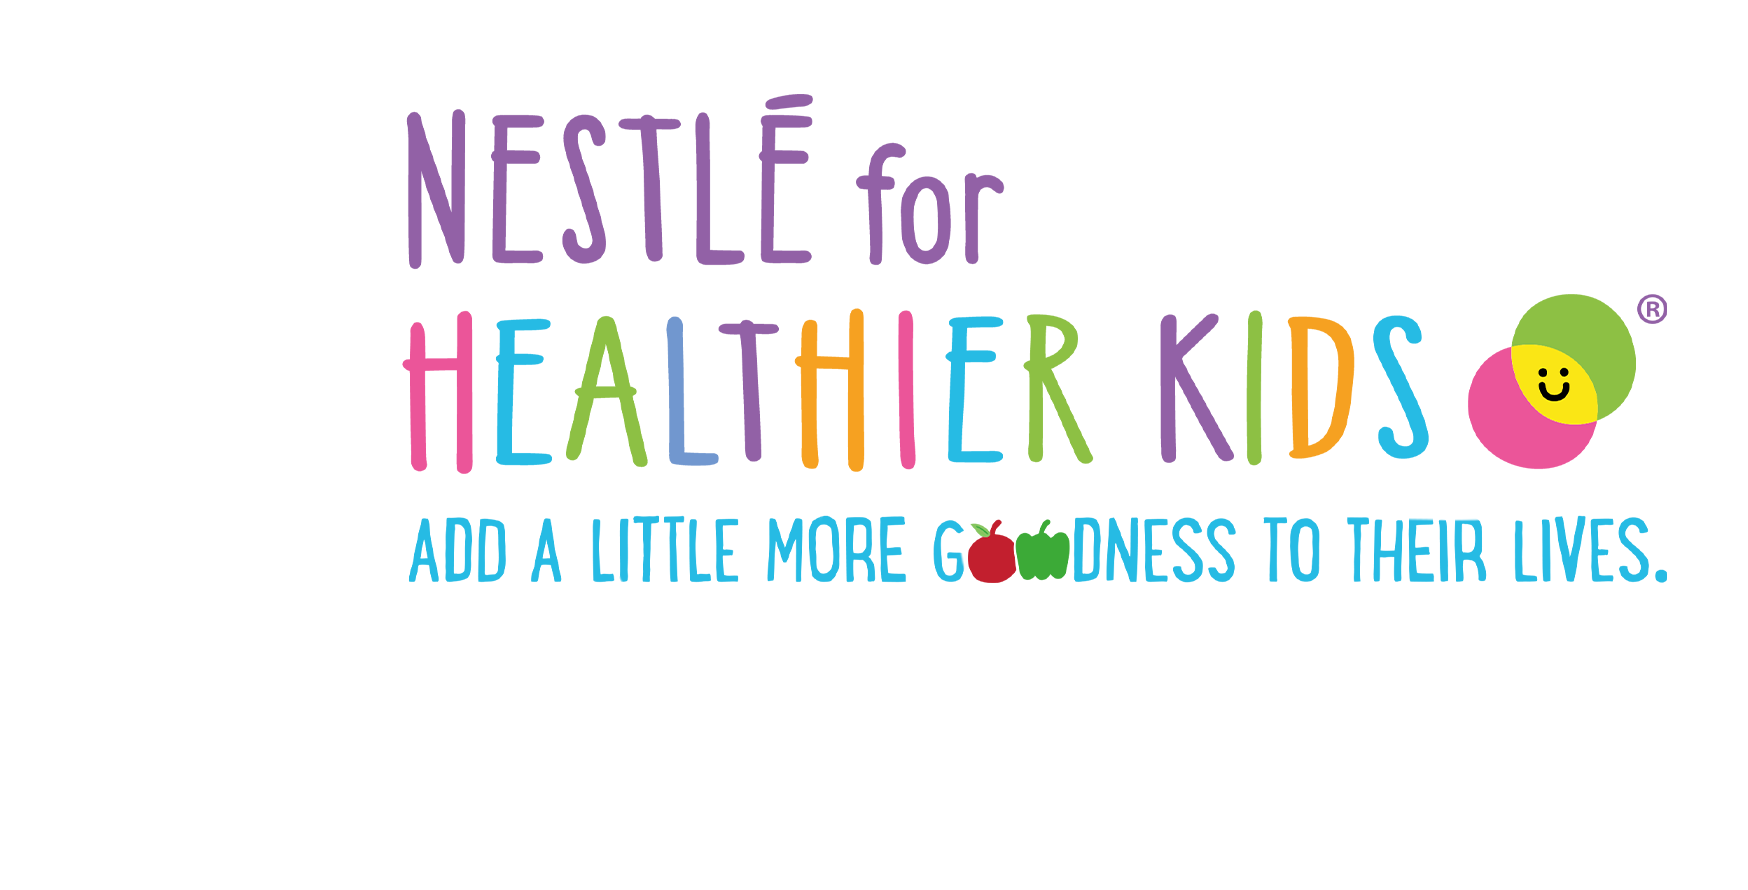 Nestlé for Healthier Kids partners with parents to improve childhood nutrition in South Africa